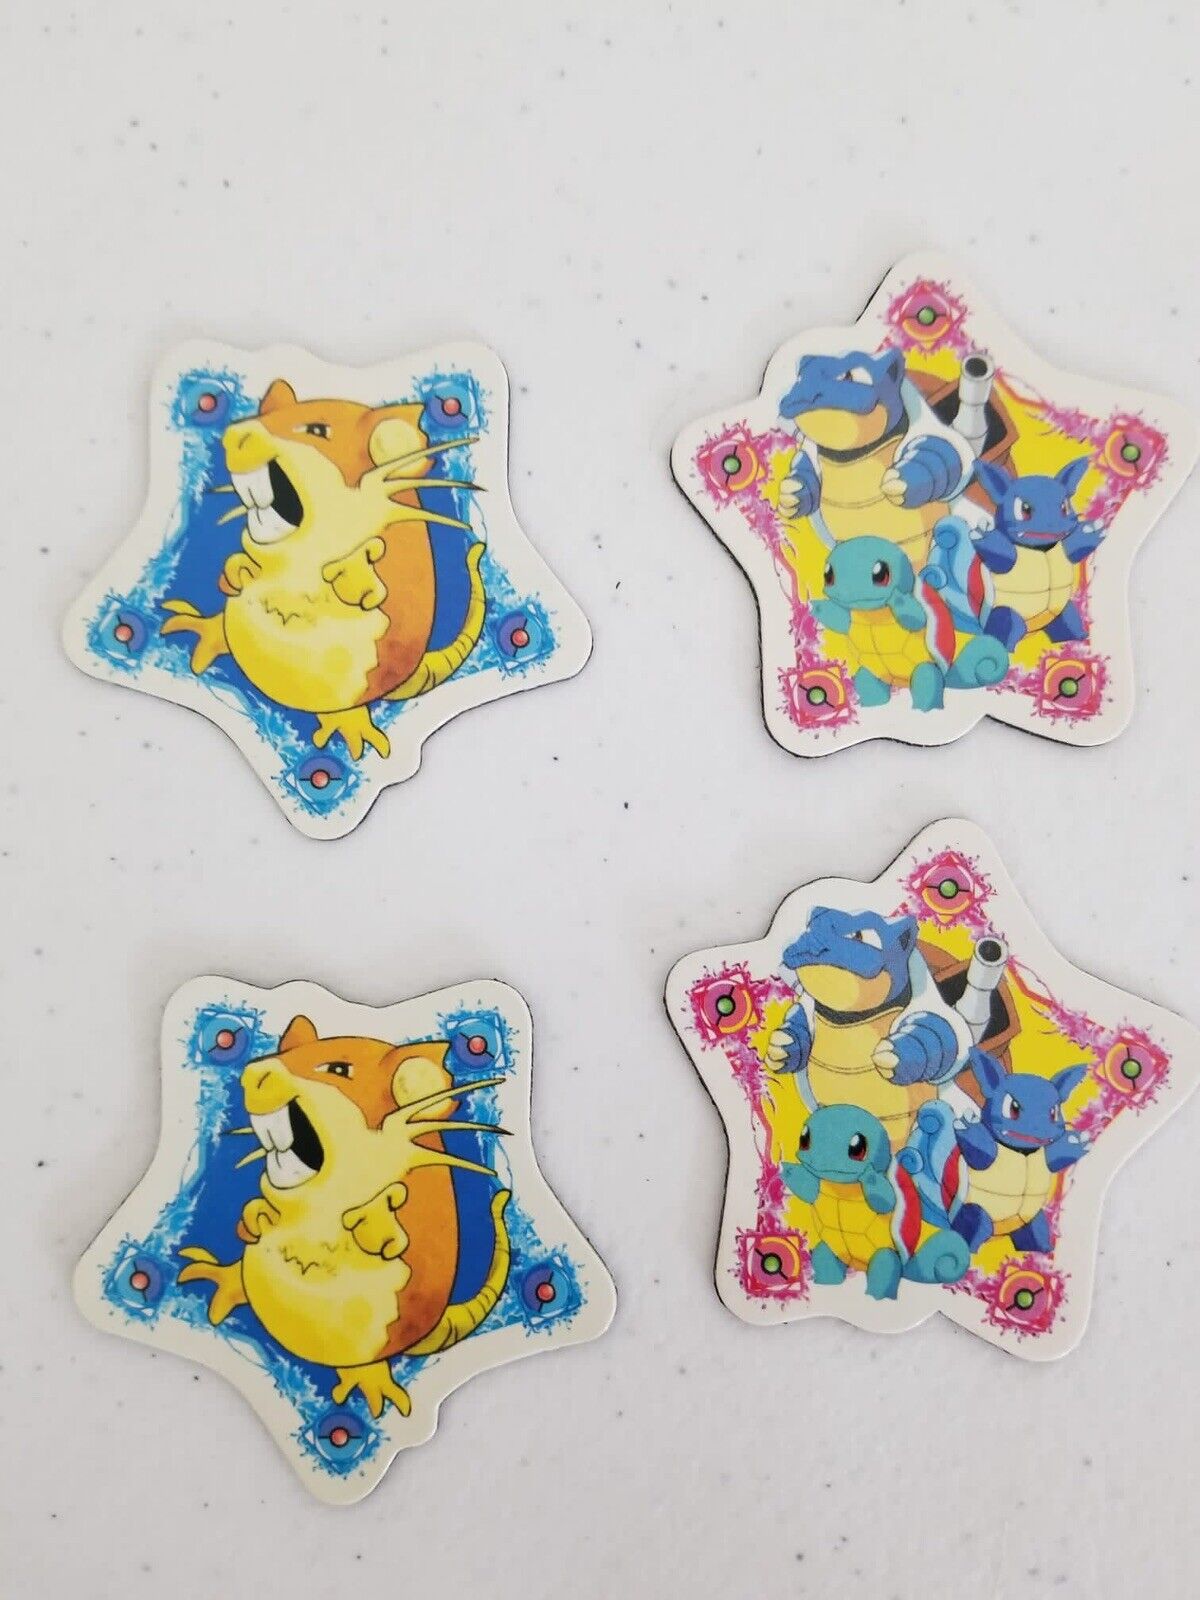 Rare Vintage 1990s Pokemon Magnets - First Generation Collectibles – Set of 24 Featuring Squirtle, Blastoise, and More – 2x2" - TreasuTiques